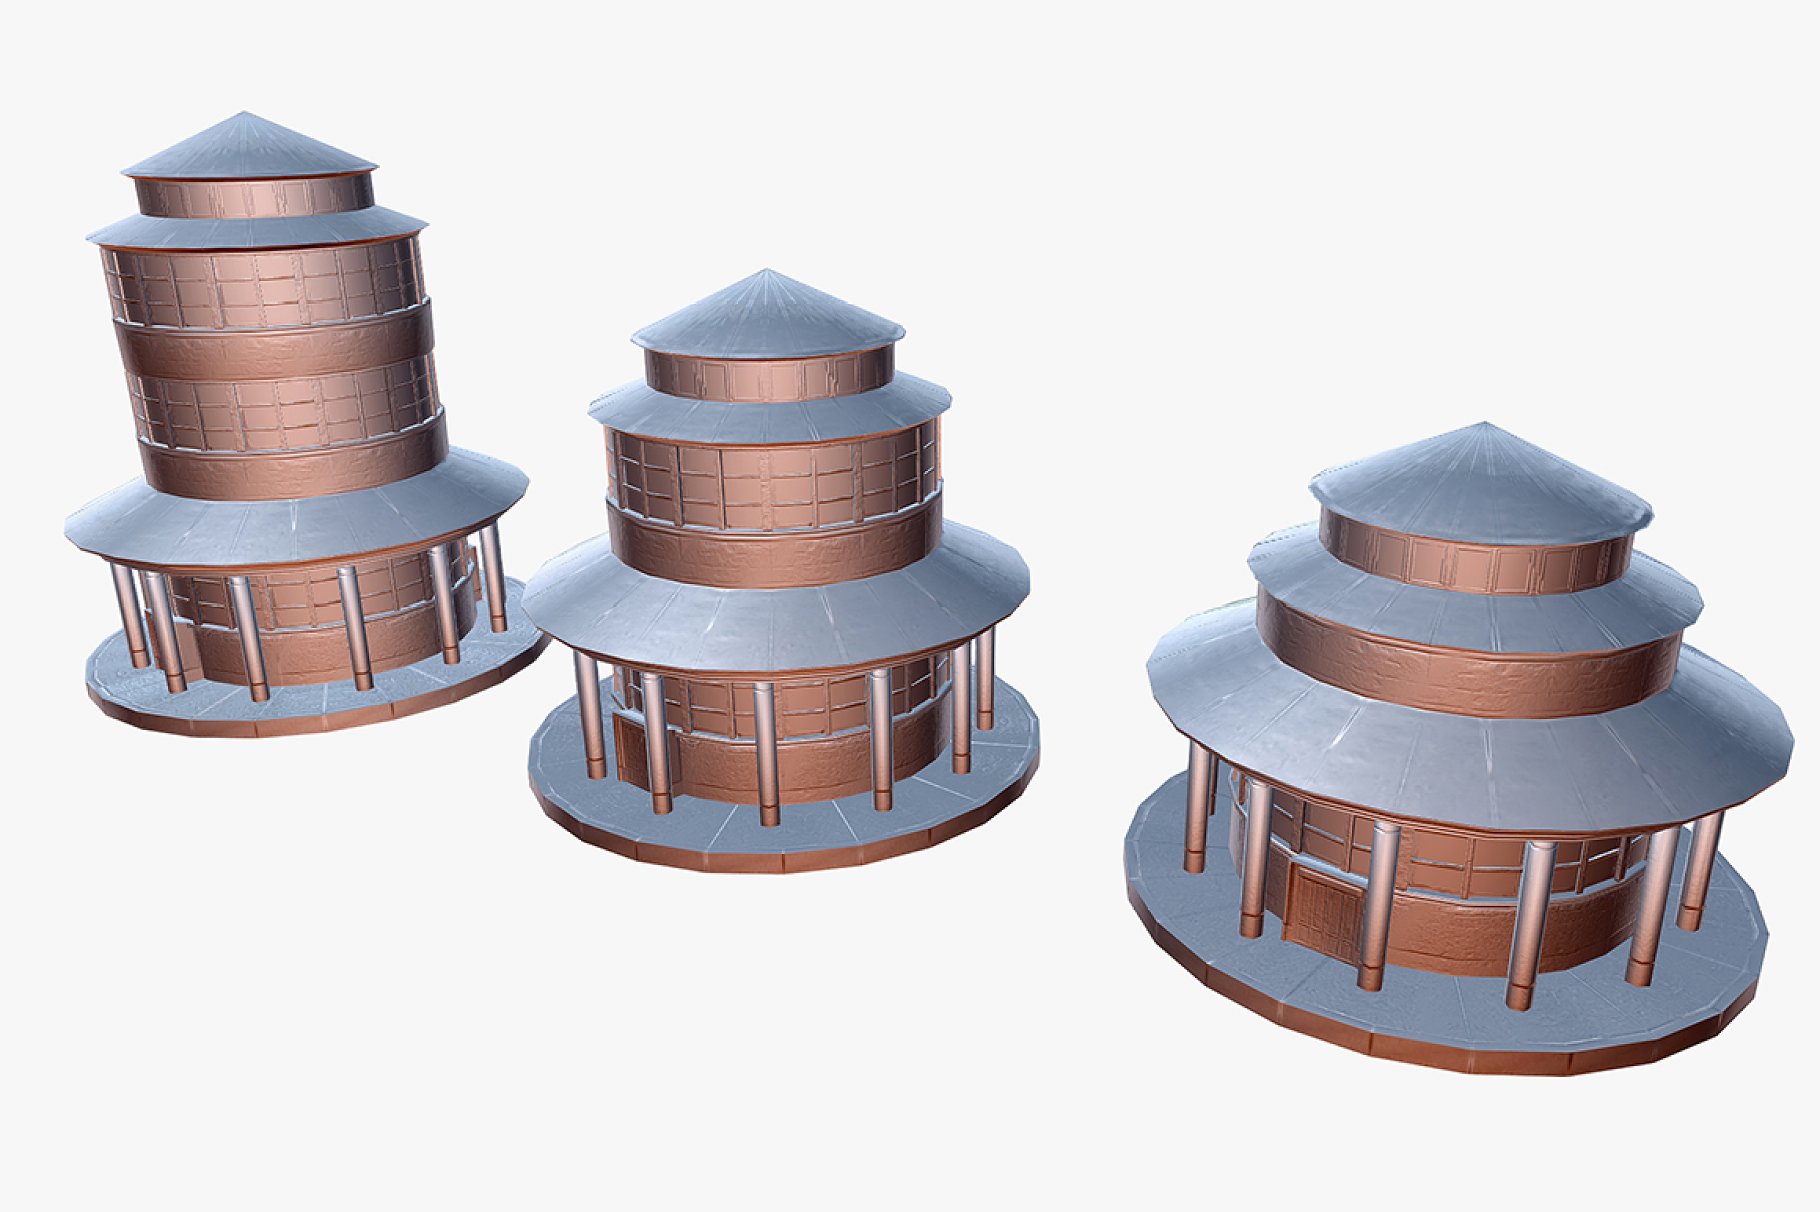 Three renderings of a round building.